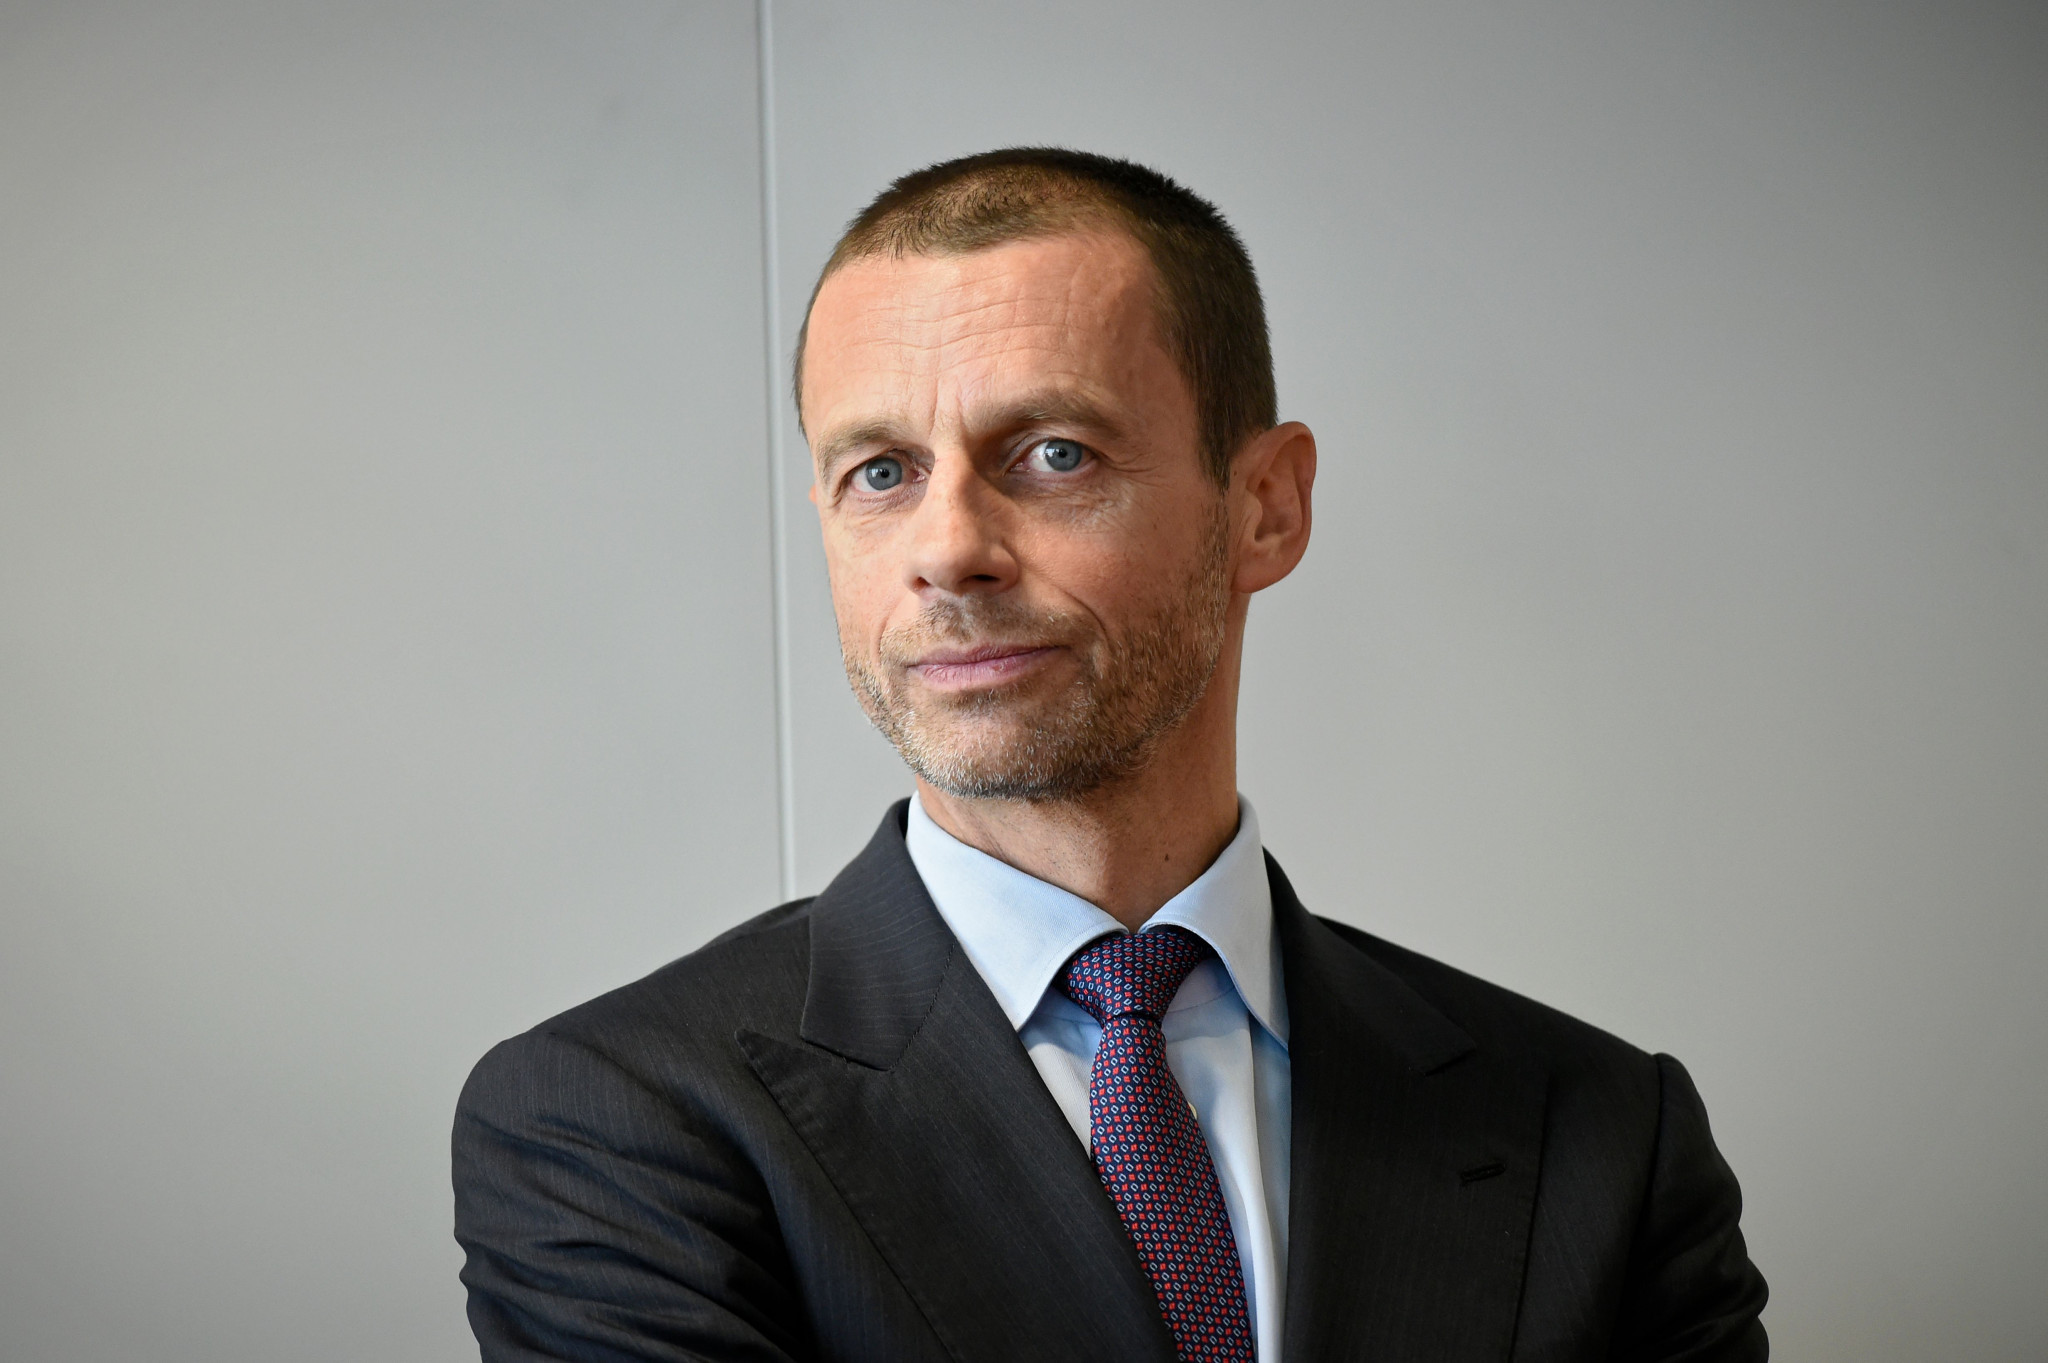 UEFA President Aleksander Ceferin said VAR will not be used in the Champions League ©Getty Images